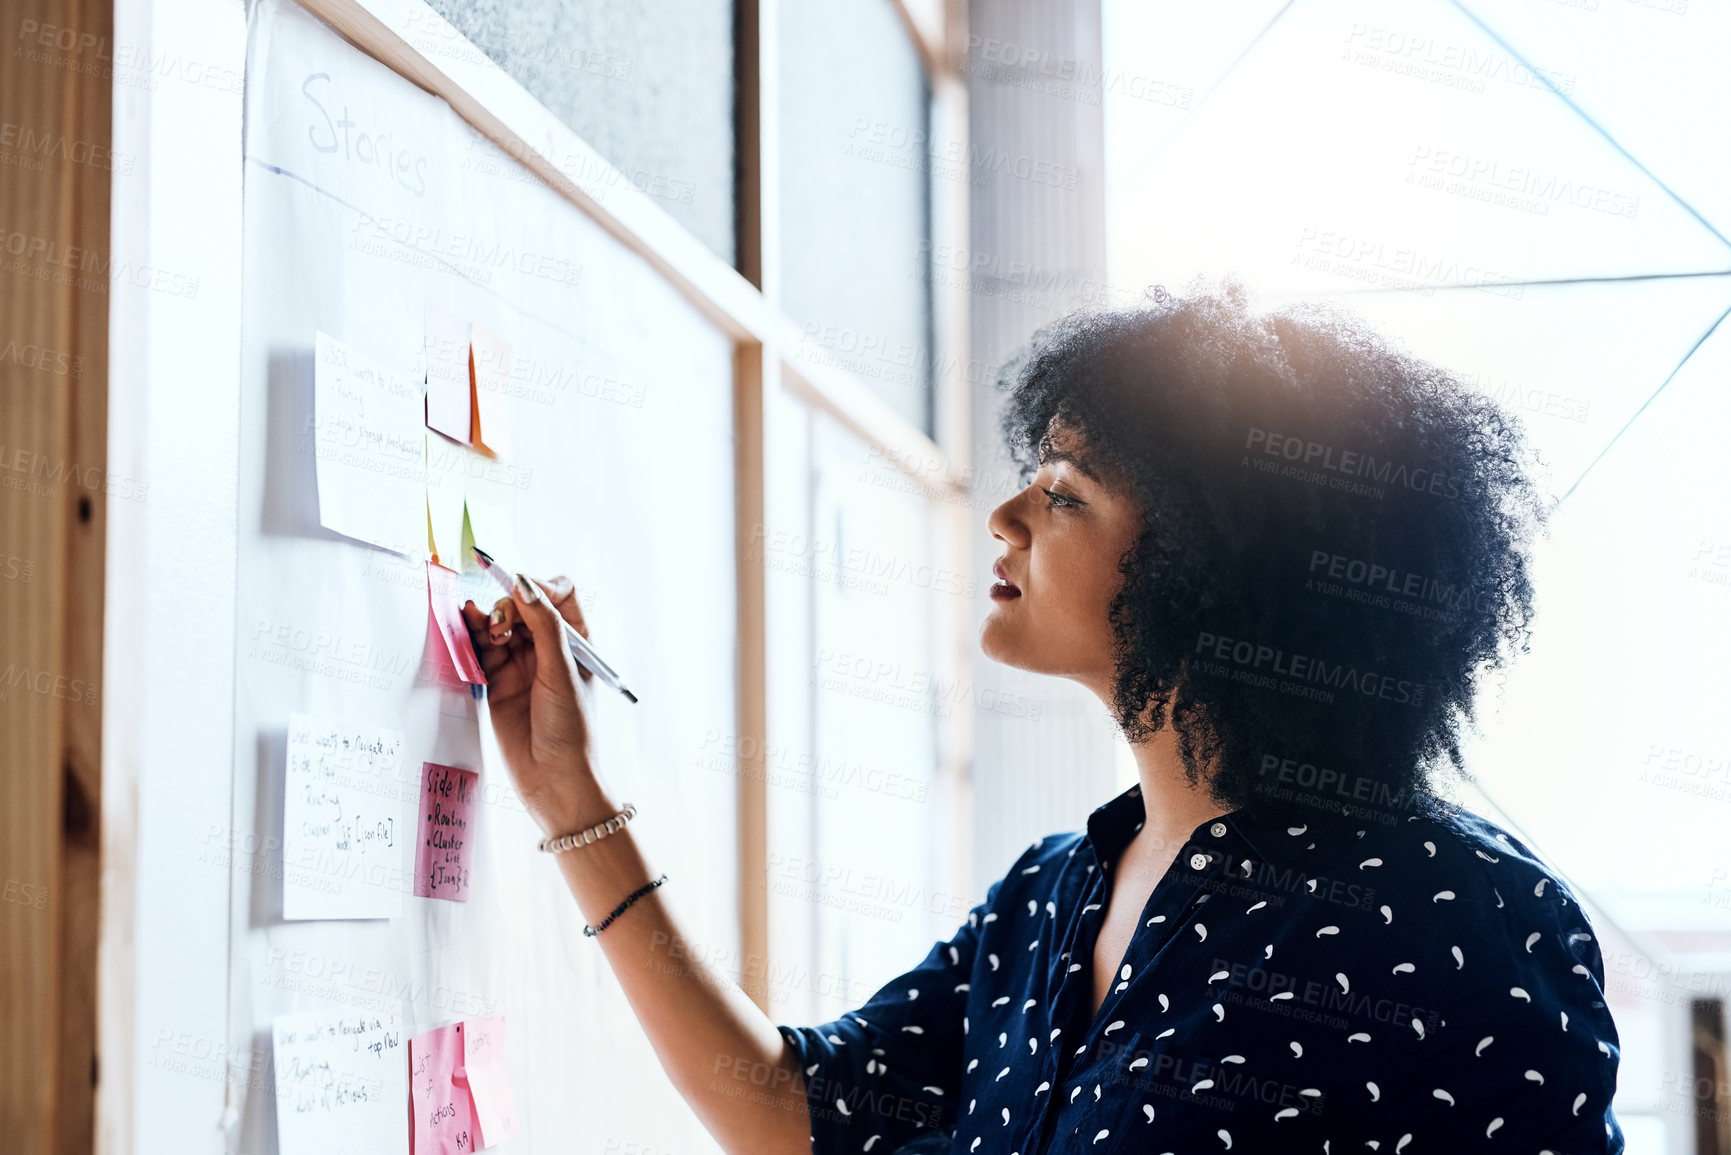 Buy stock photo Shot of a young female designer doing some planning and using sticky notes on a white board in the office